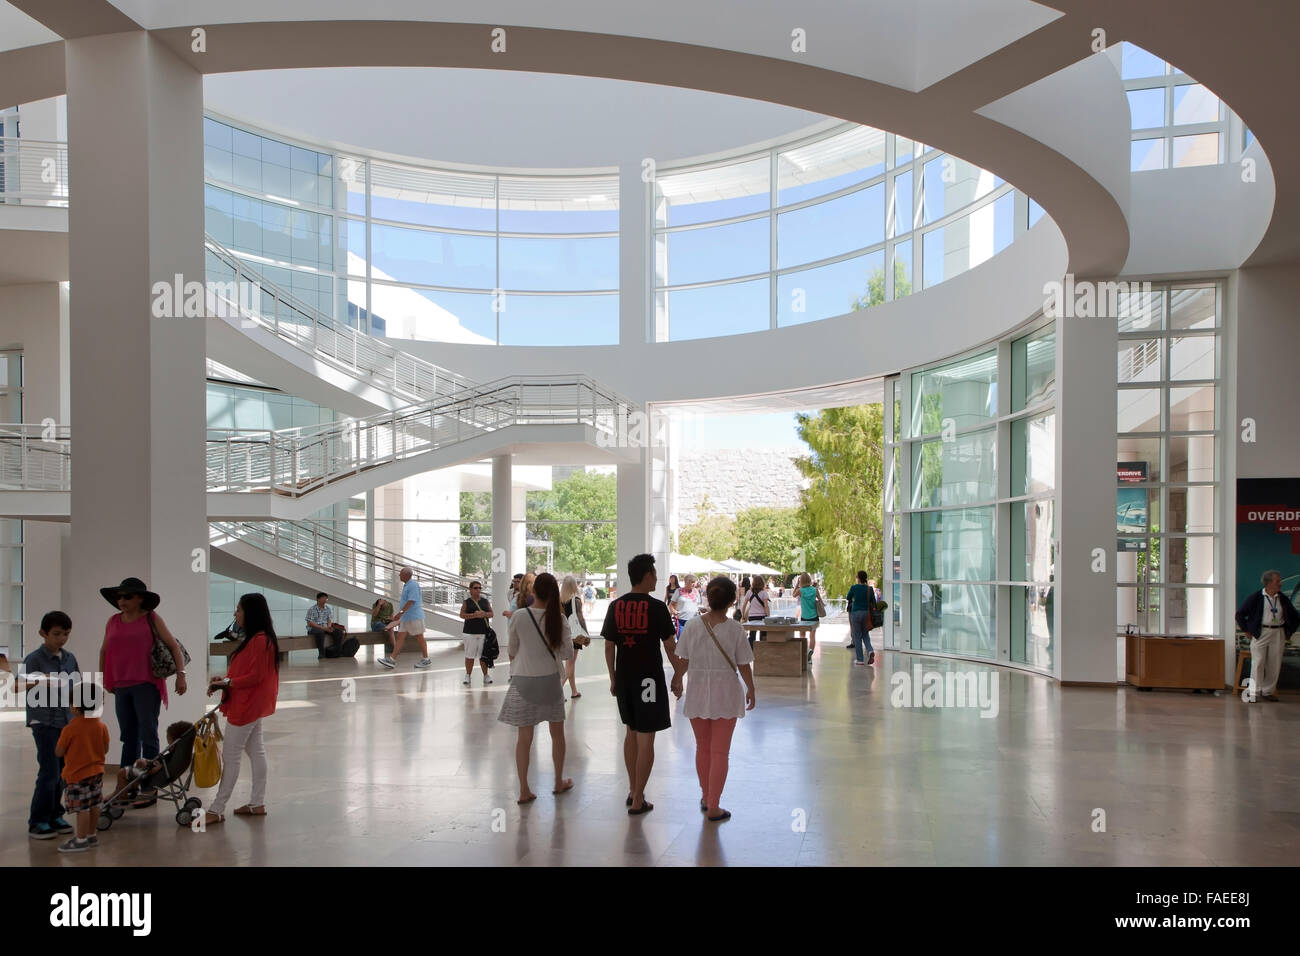 The museum entrance hall at the Getty Center in Los Angeles Stock Photo